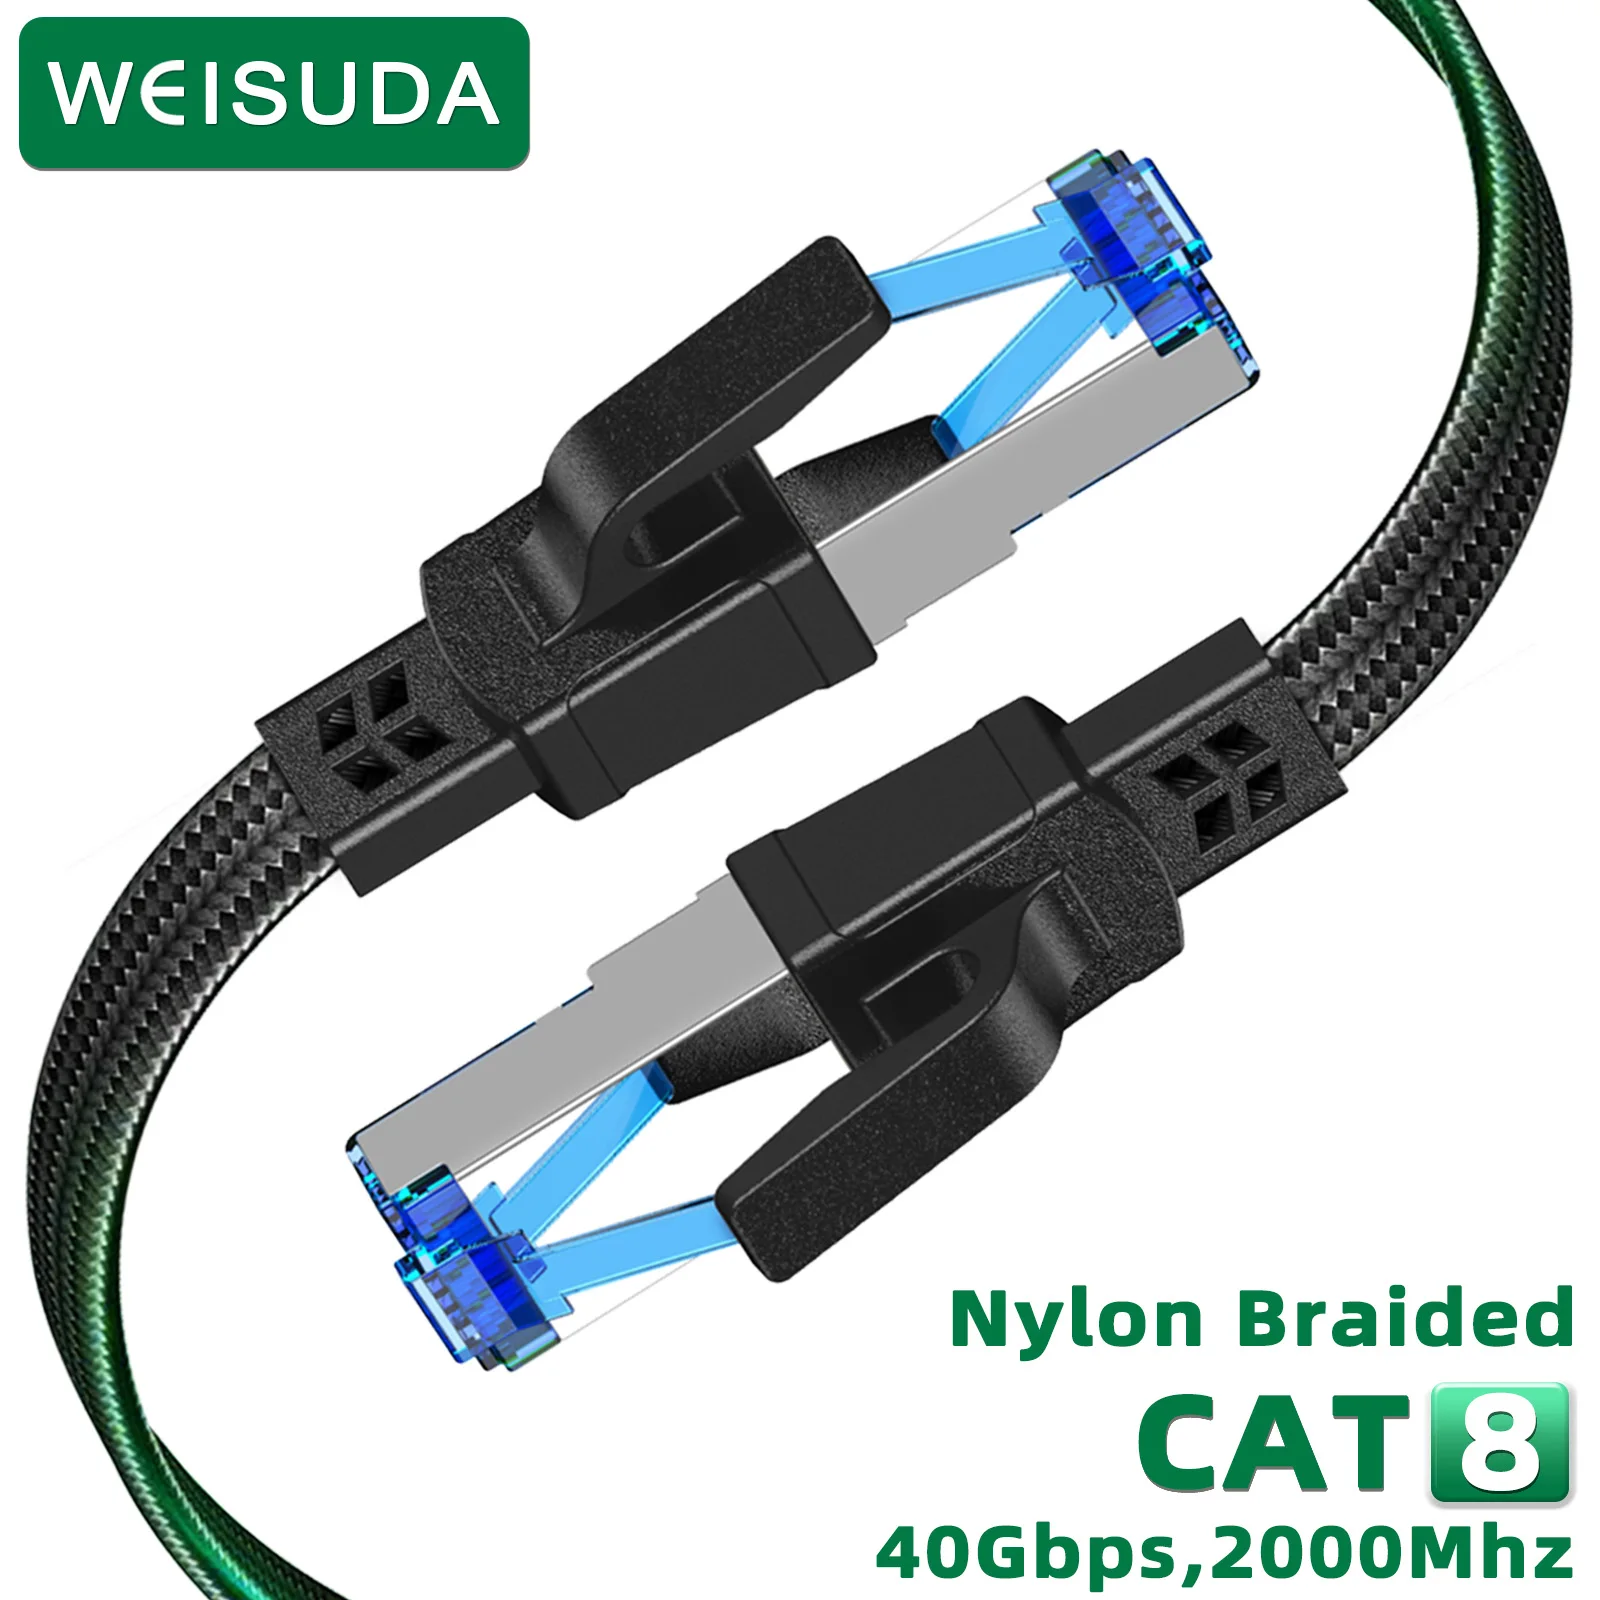 Cat8 Ethernet Cable 40Gbps 2000MHz Nylon Braided RJ45 Network Lan Patch Cord for Router Modem Internet Ethernet Cable Cat 8